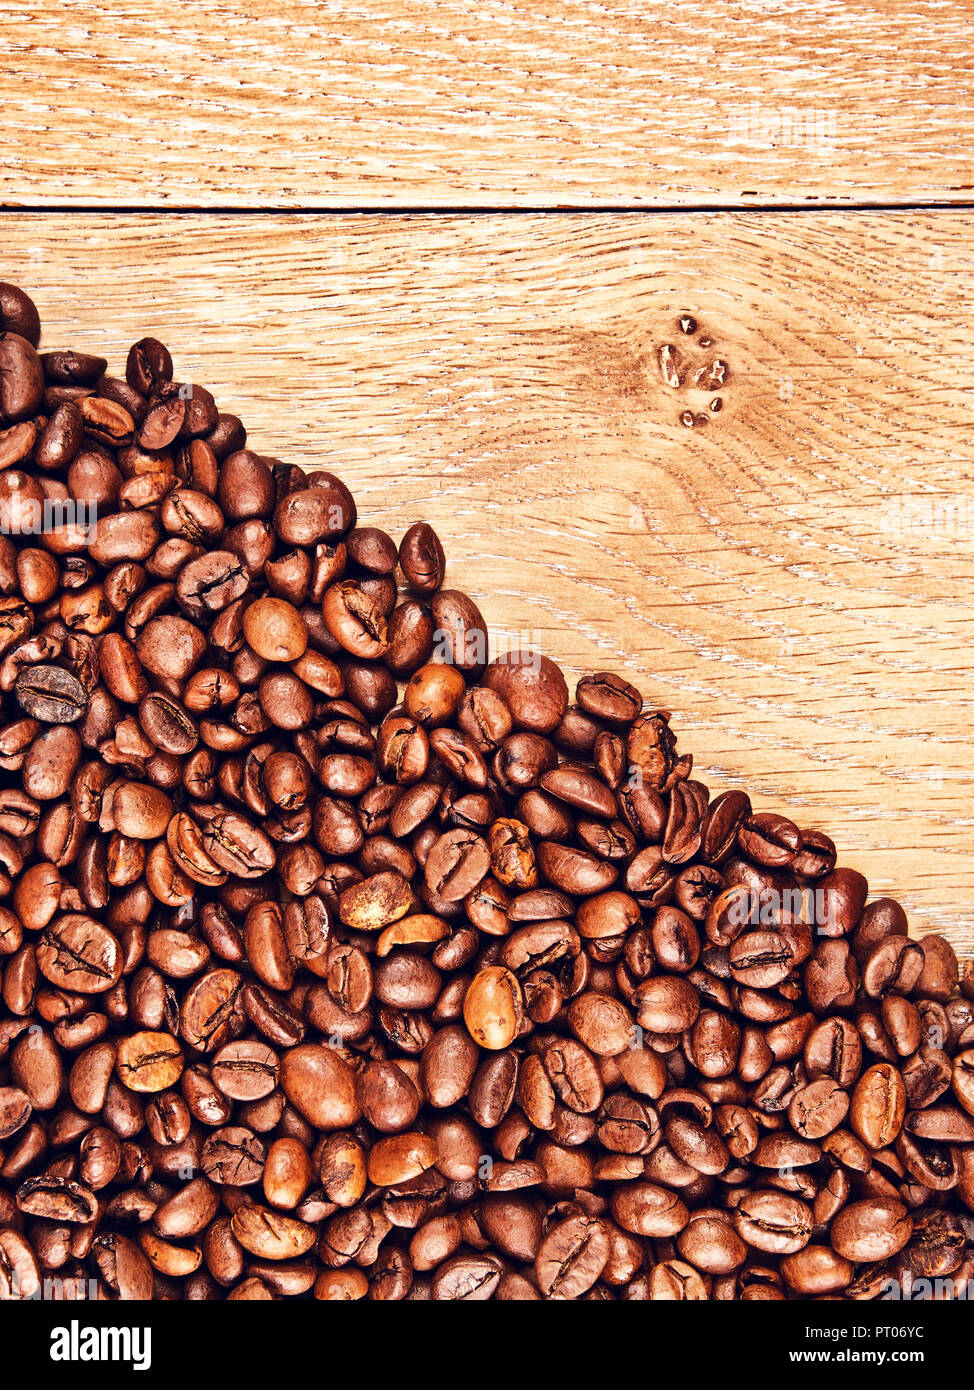 roasted coffee beans on wooden table, background Stock Photo